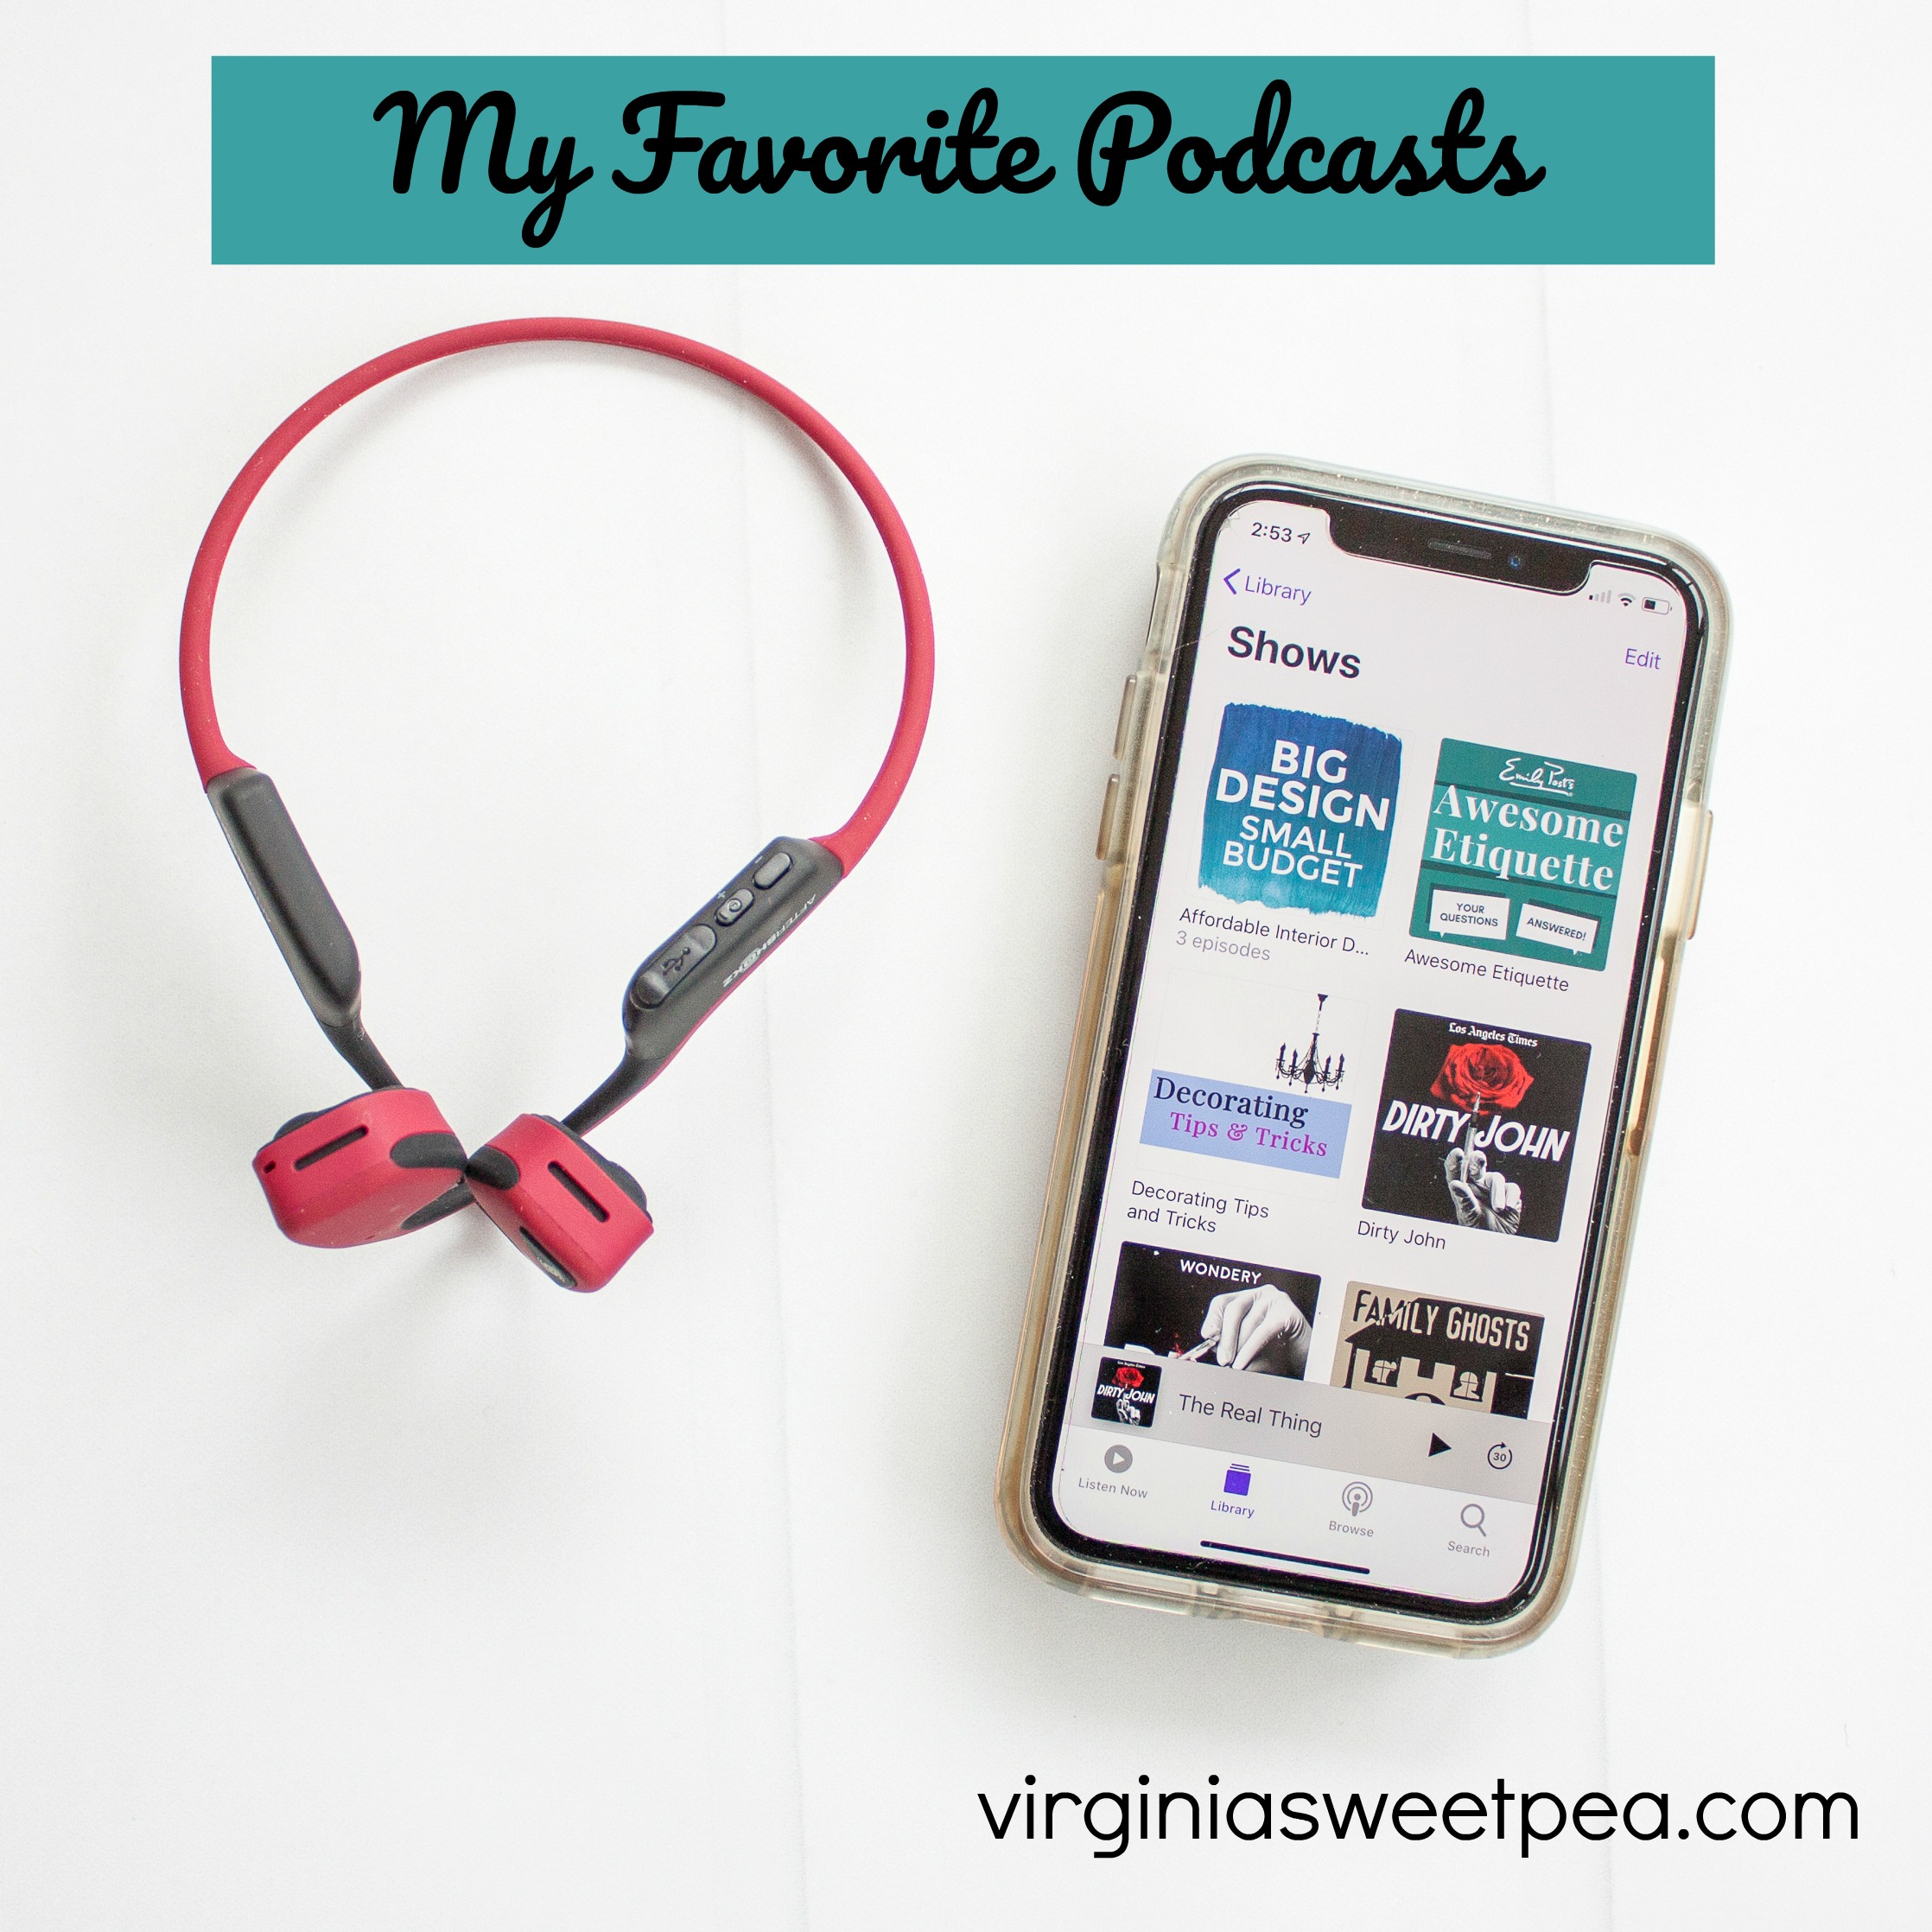 Get ideas for podcasts to enjoy listening to. Podcasts are great entertainment while driving, exercising, working around the house, or to listen to when you want to relax. #podcast #podcastideas #bestpodcasts